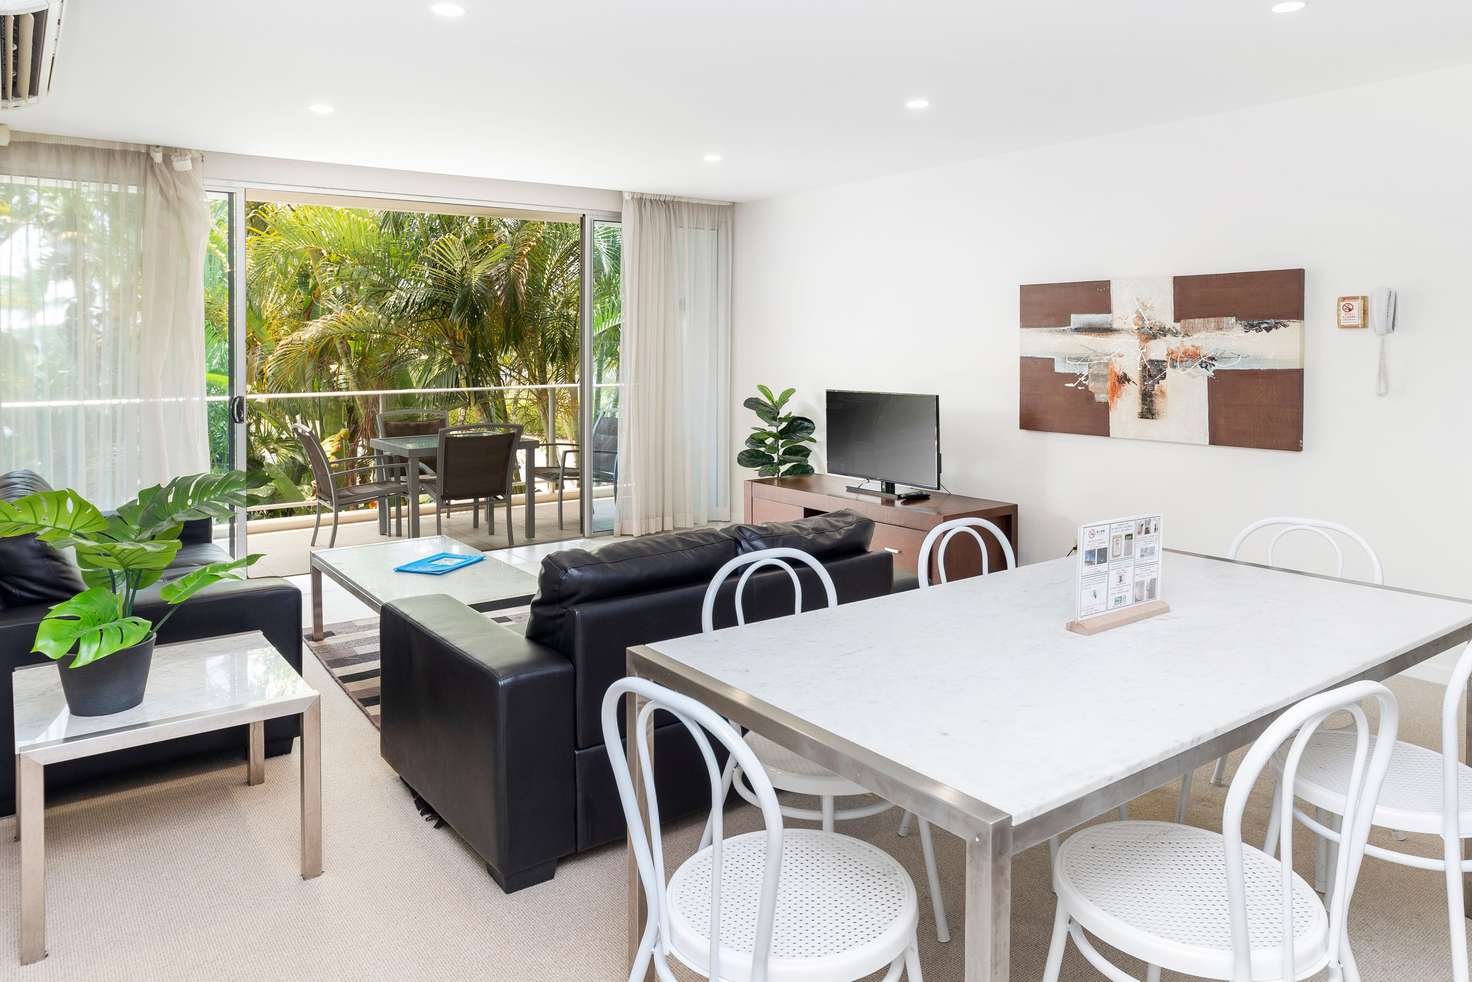 Main view of Homely apartment listing, 1217/2 Activa Way, Hope Island QLD 4212